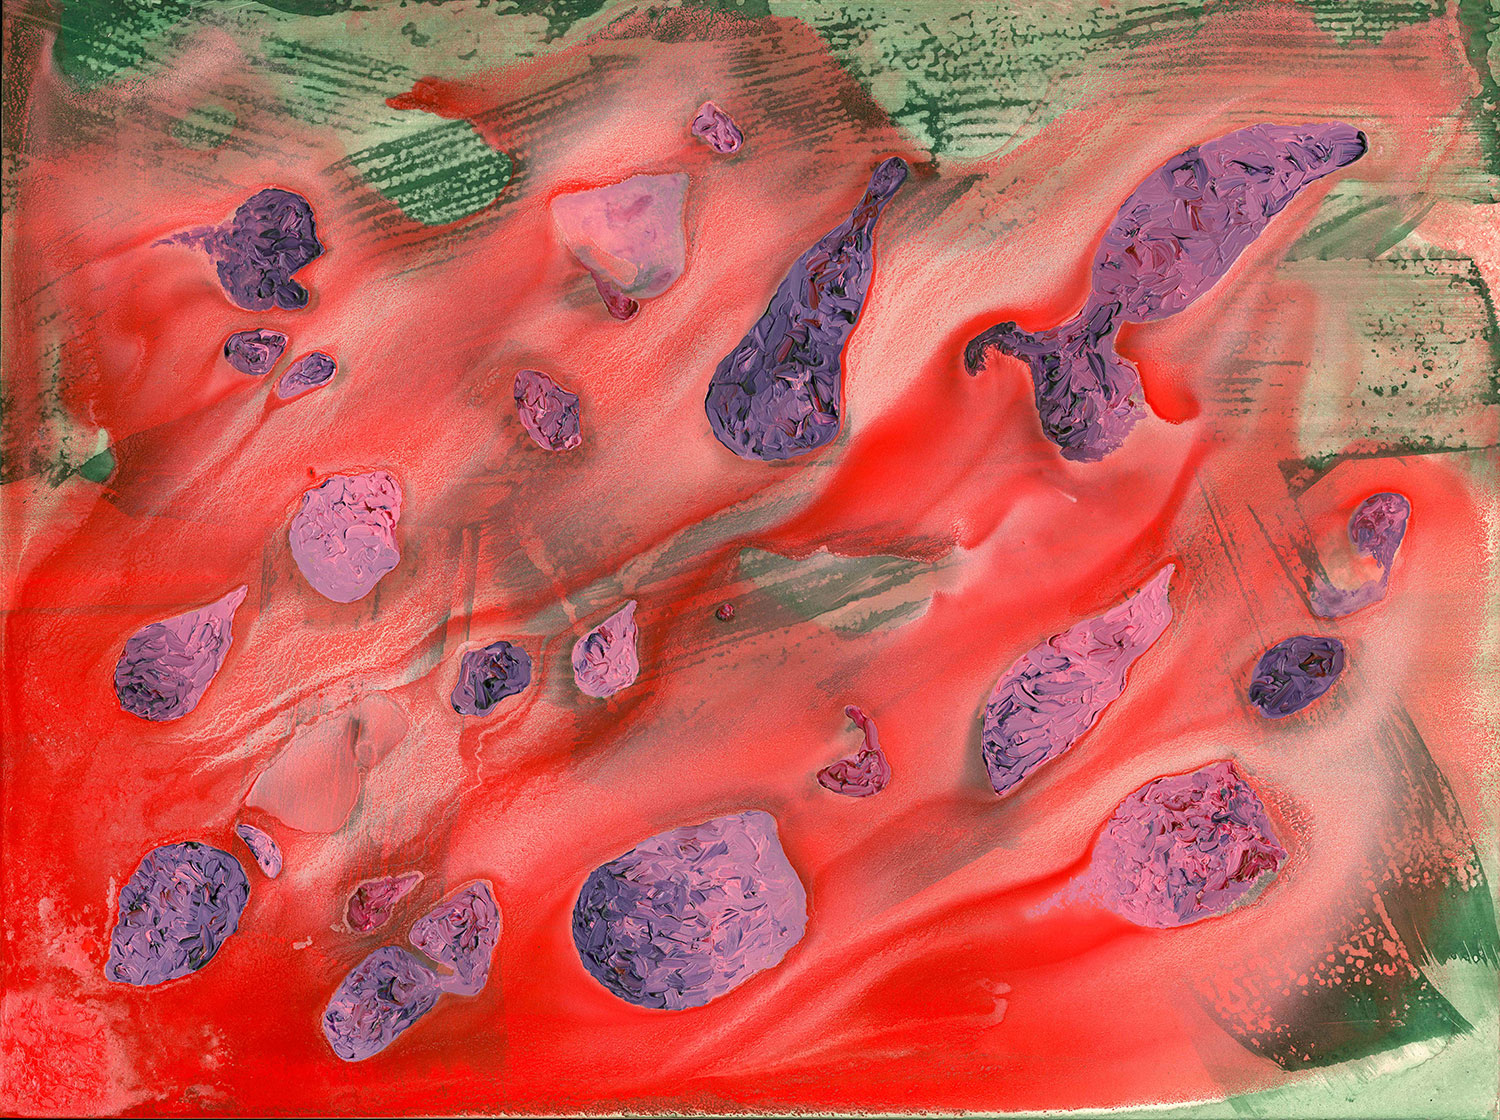   Purple_Green_Pink Abstraction   2014  acrylic  18 X 24"   